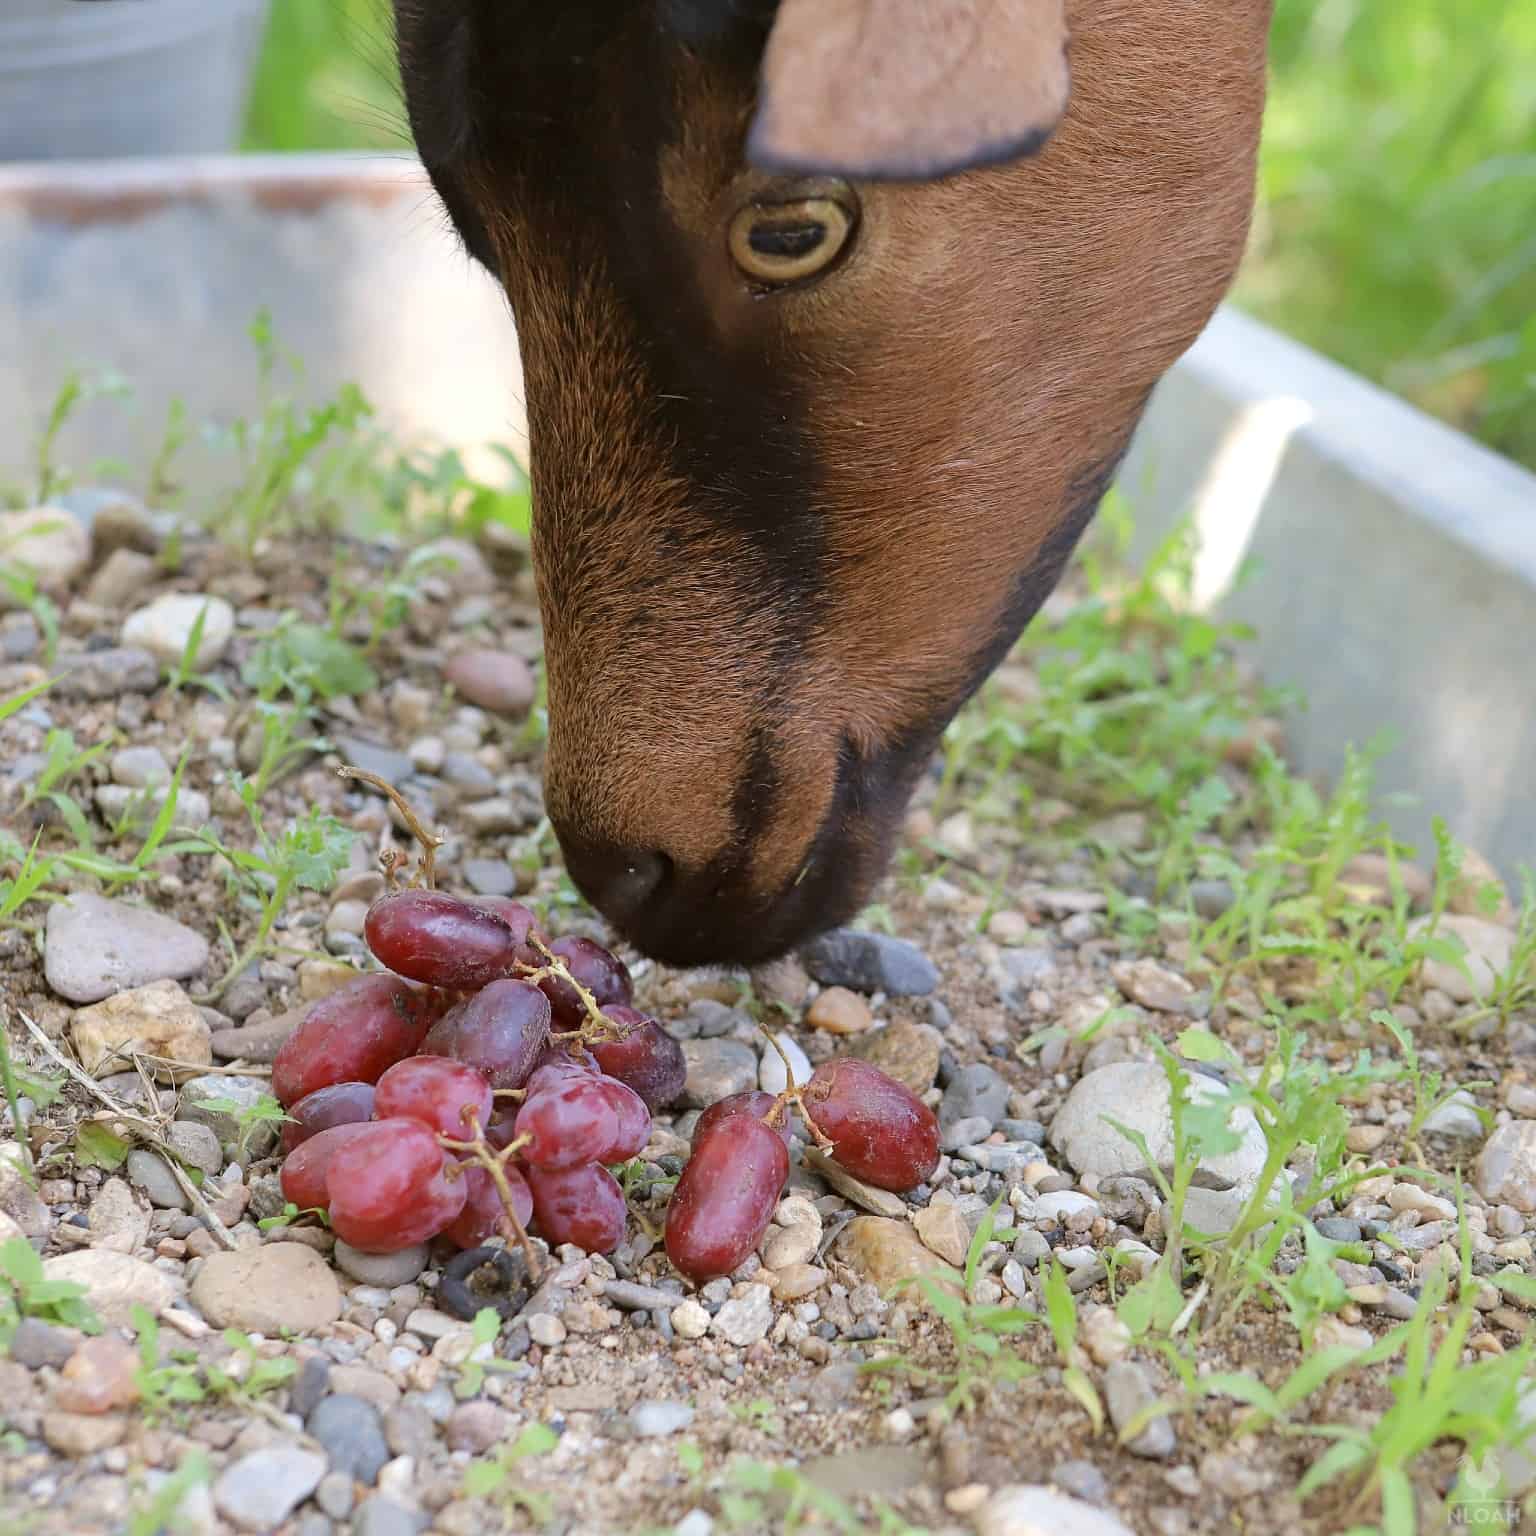 a goat trying some grapes